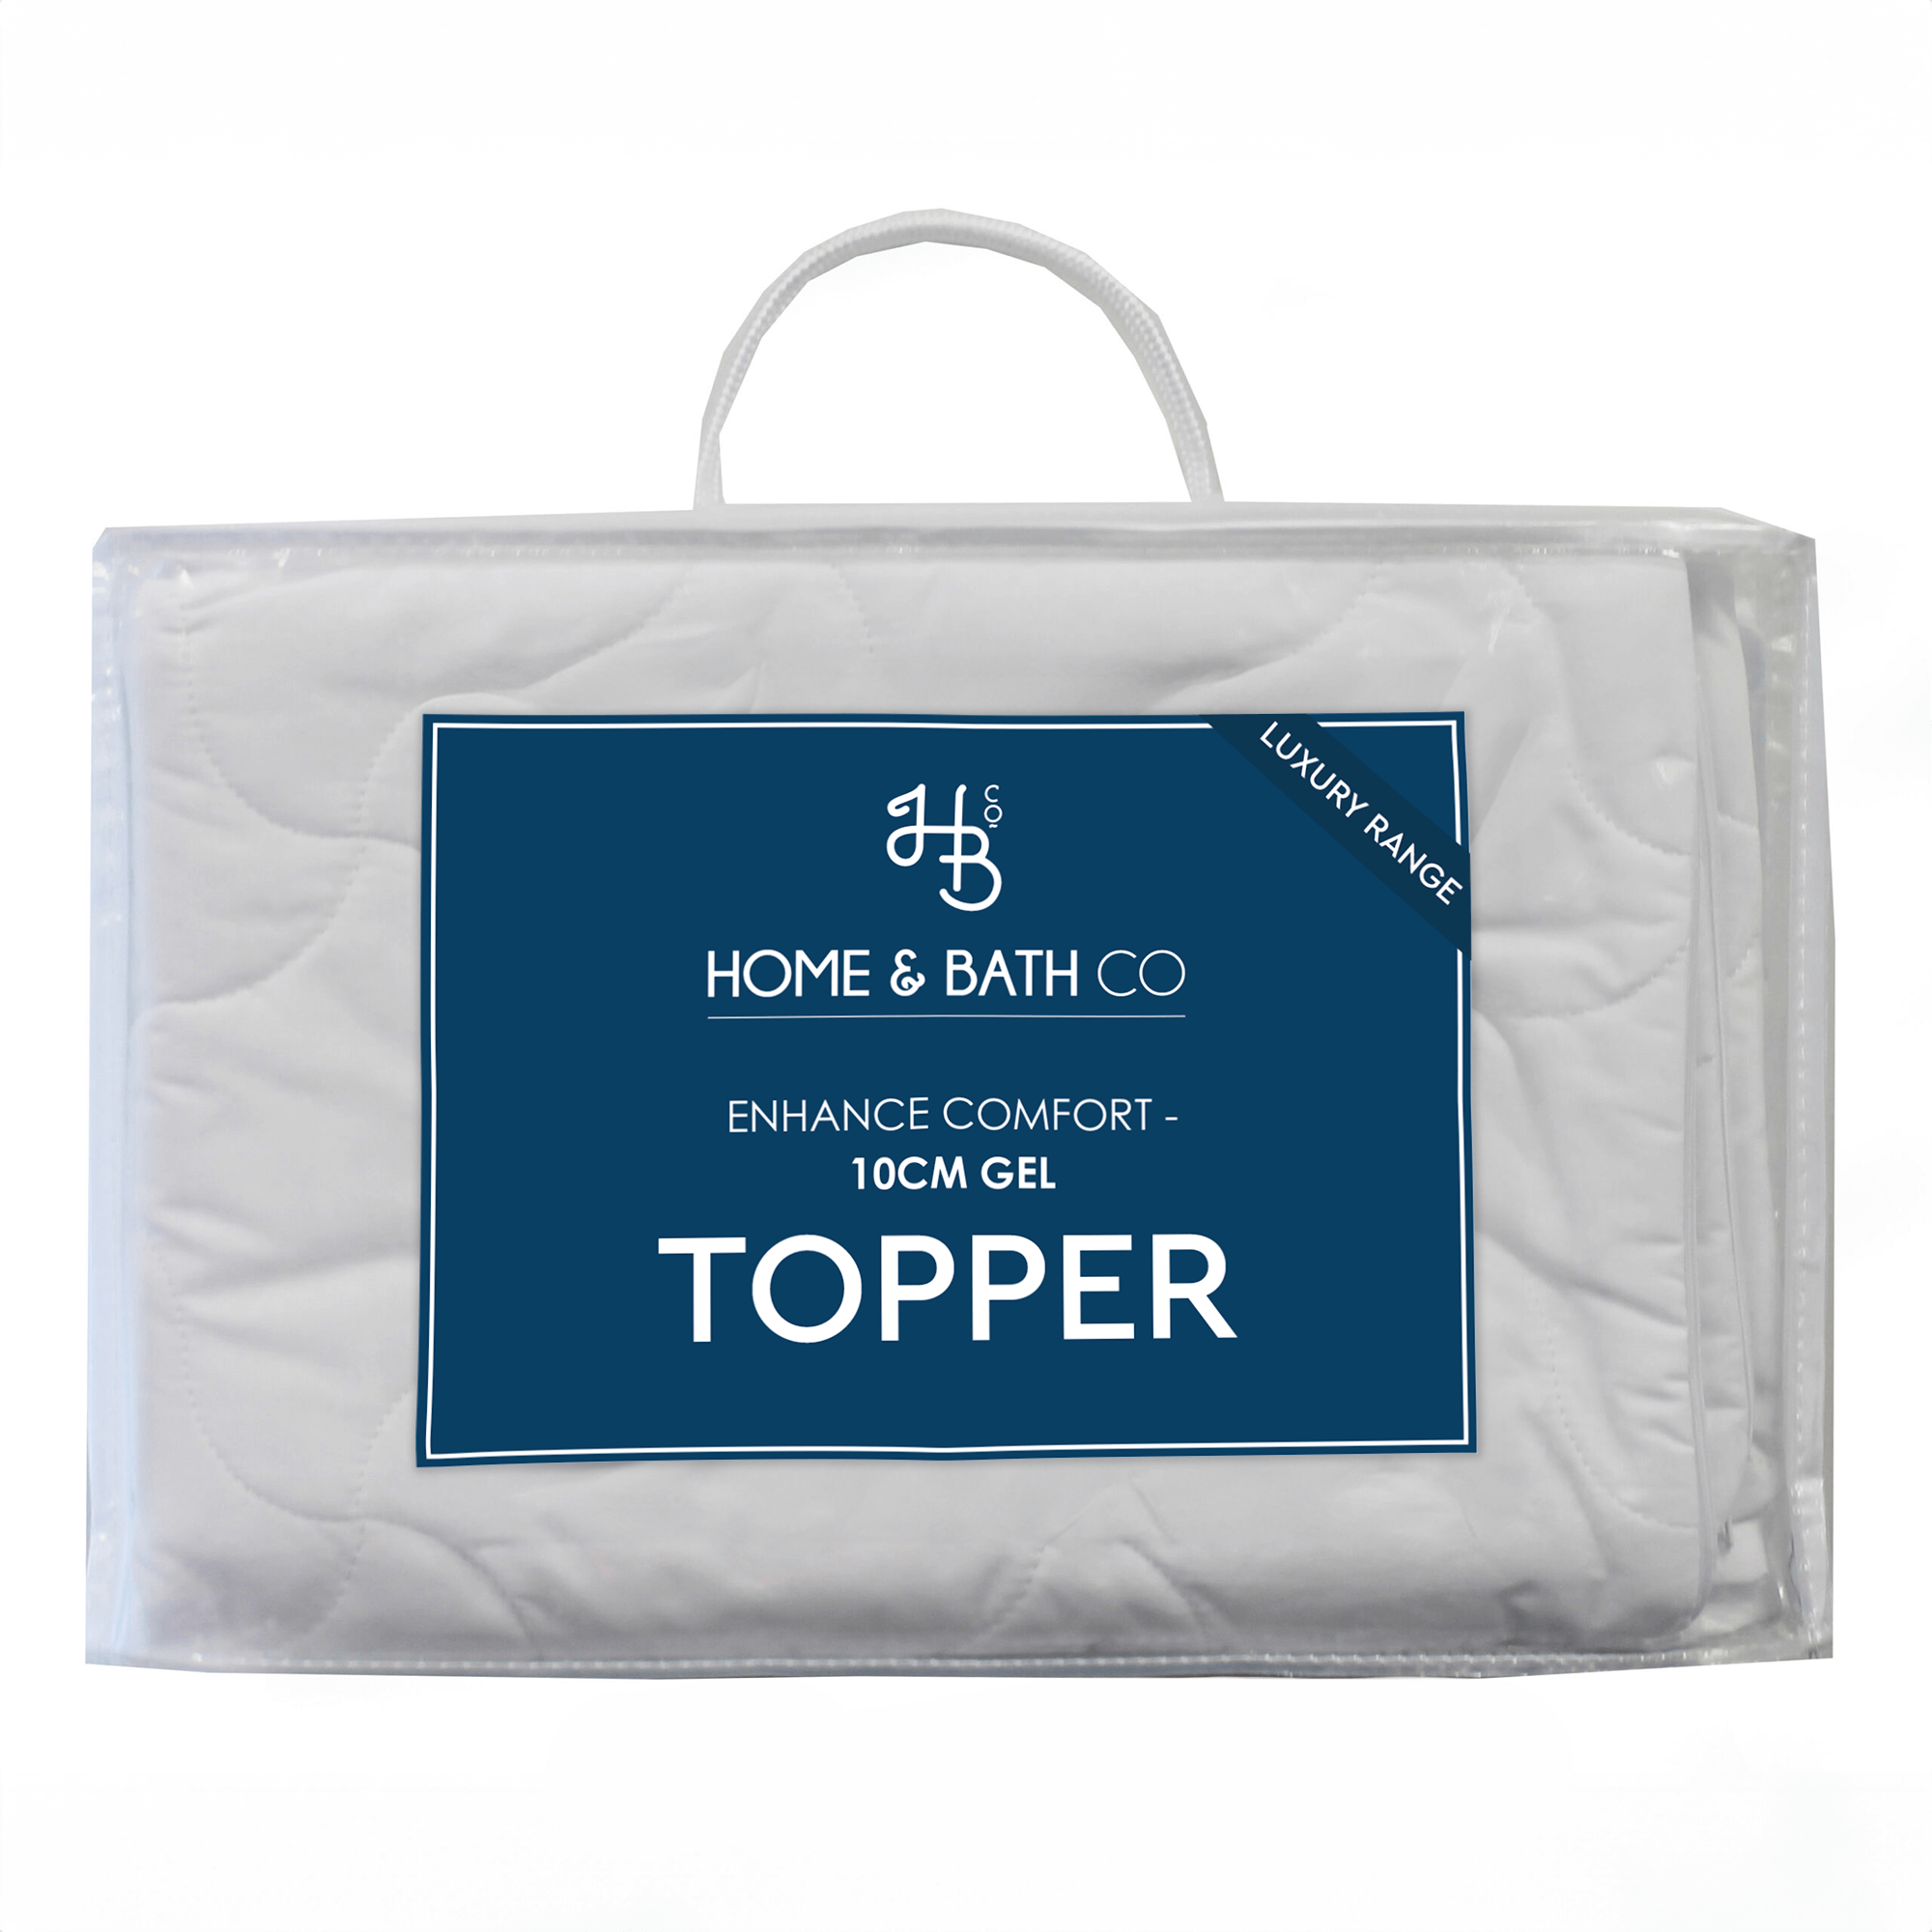 Enhance Comfort with Our 10cm Gel Topper